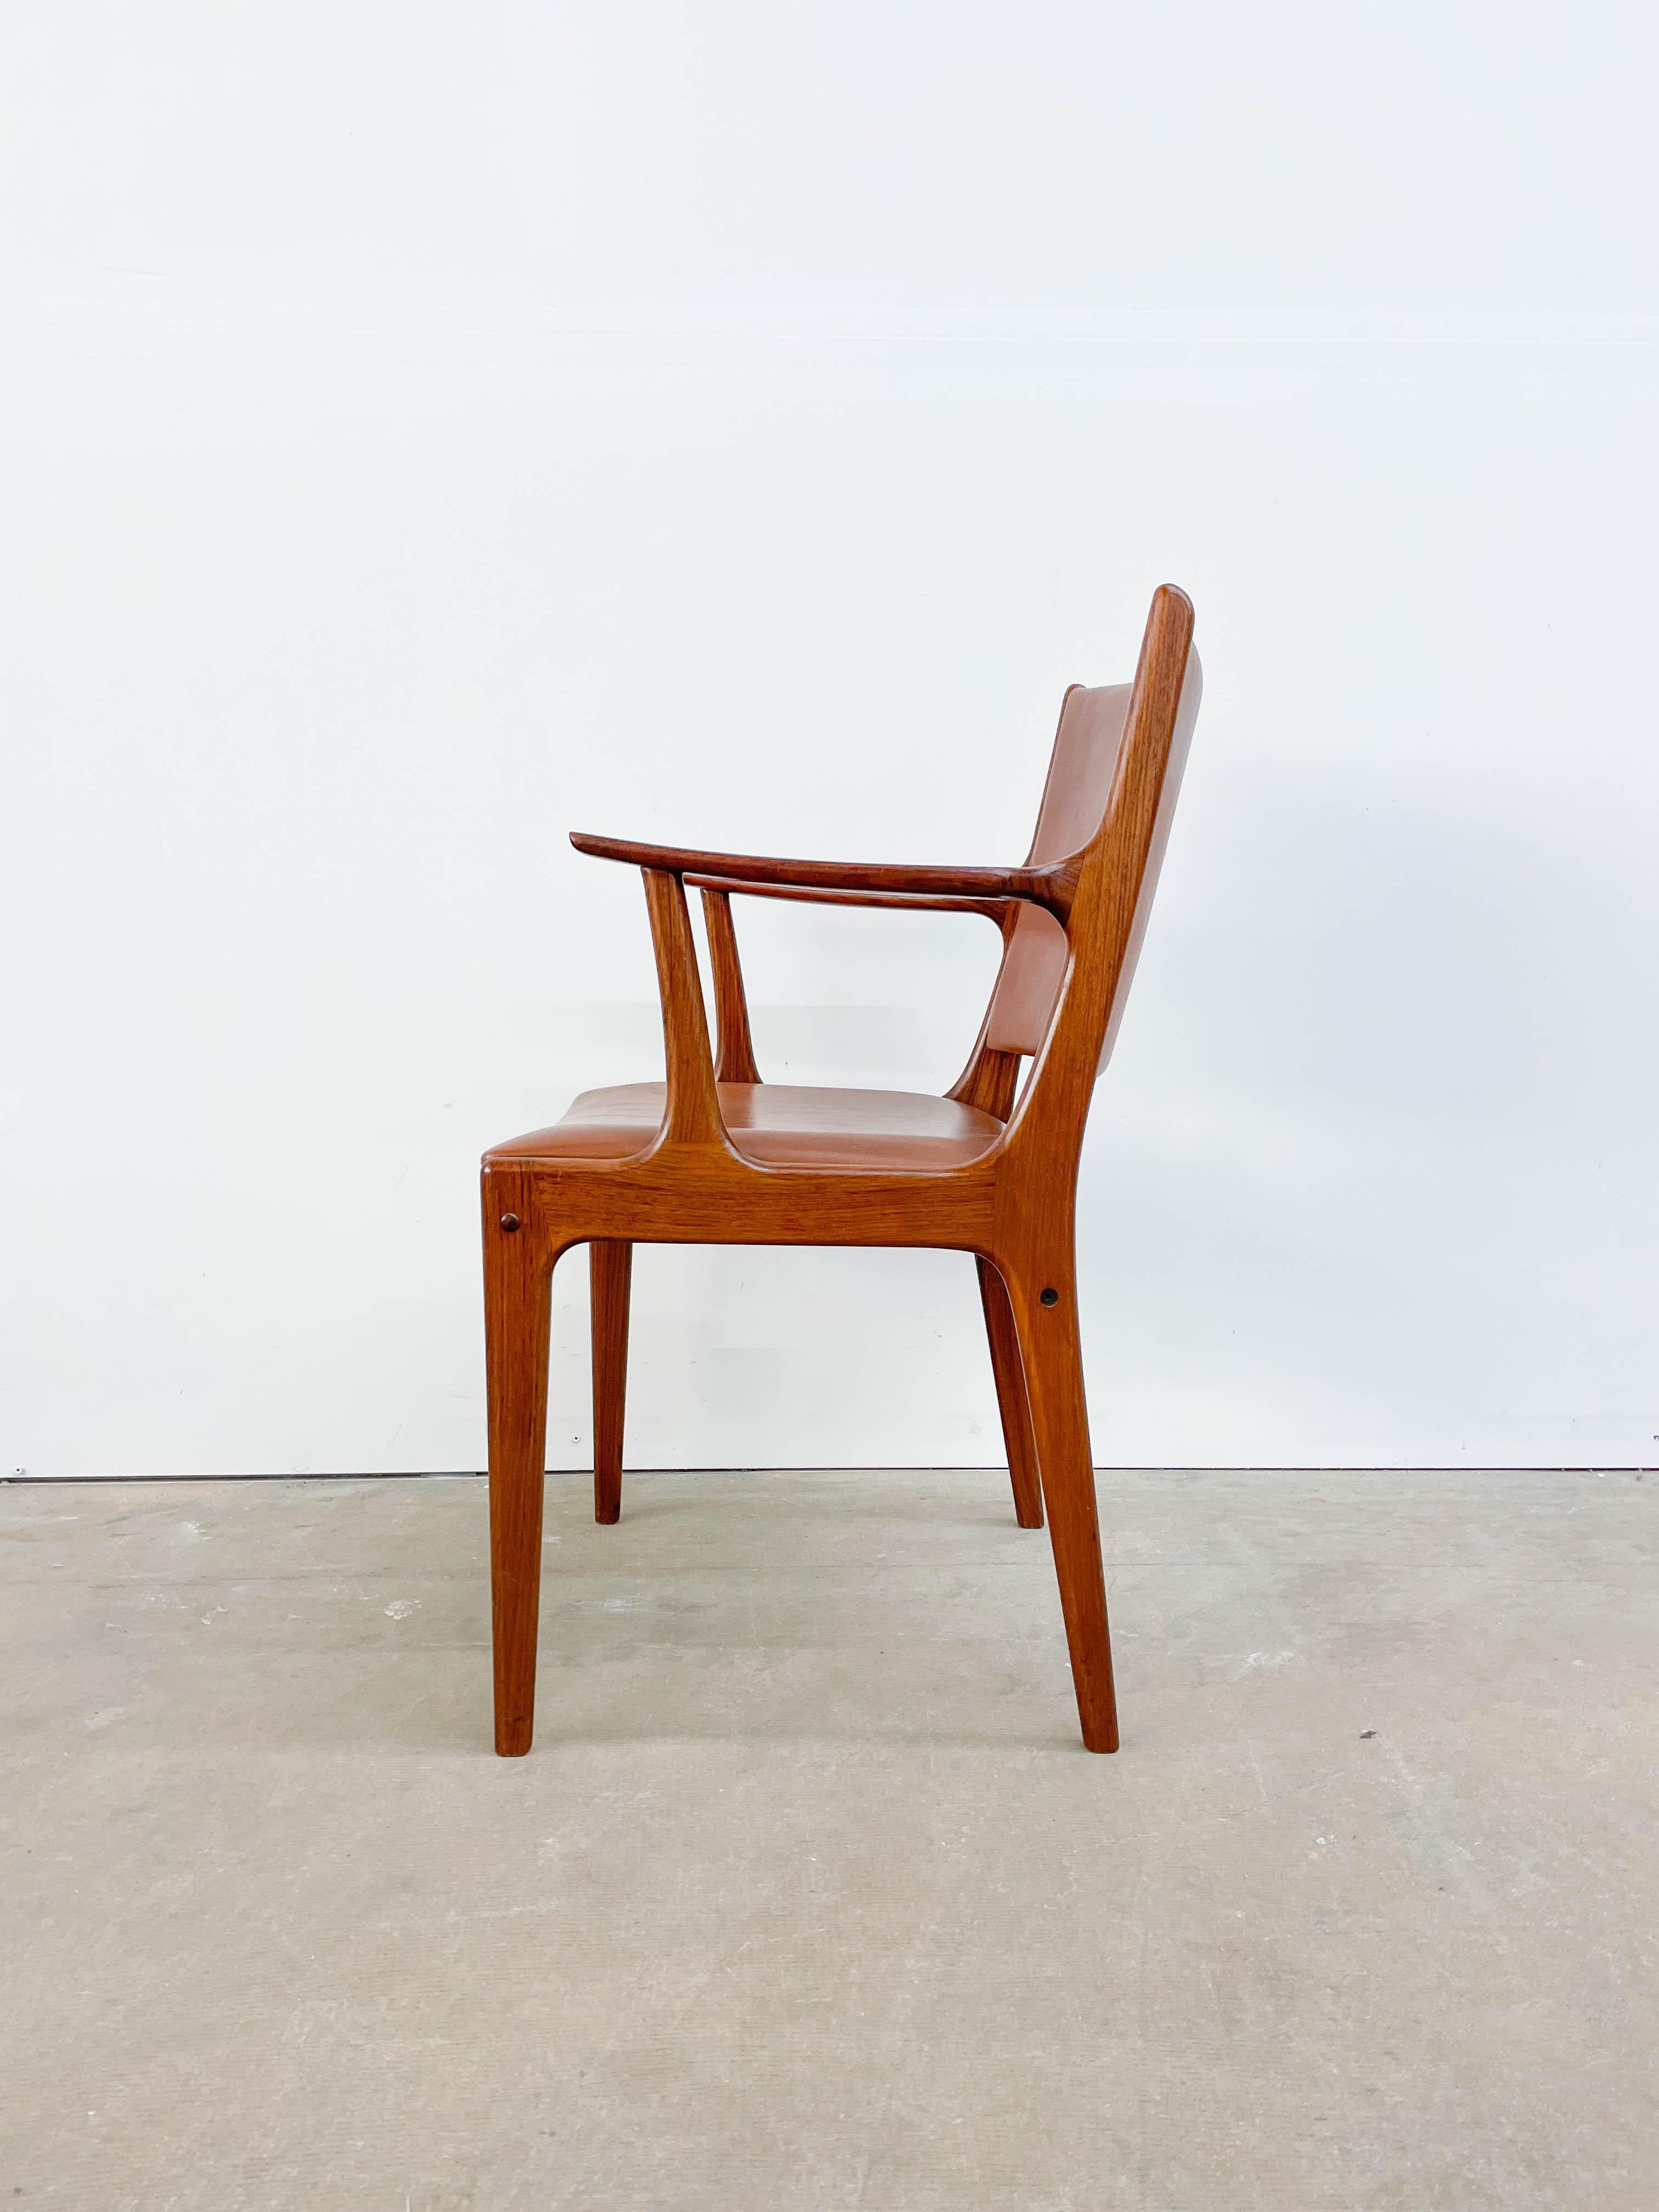 This solid rosewood armchair with leather seat and back was designed by Johannes and Eva Andersen in the 1960s. The chair is in very good vintage condition with a nice patina on the leather. The occasional marks on the seat and minimal signs of wear